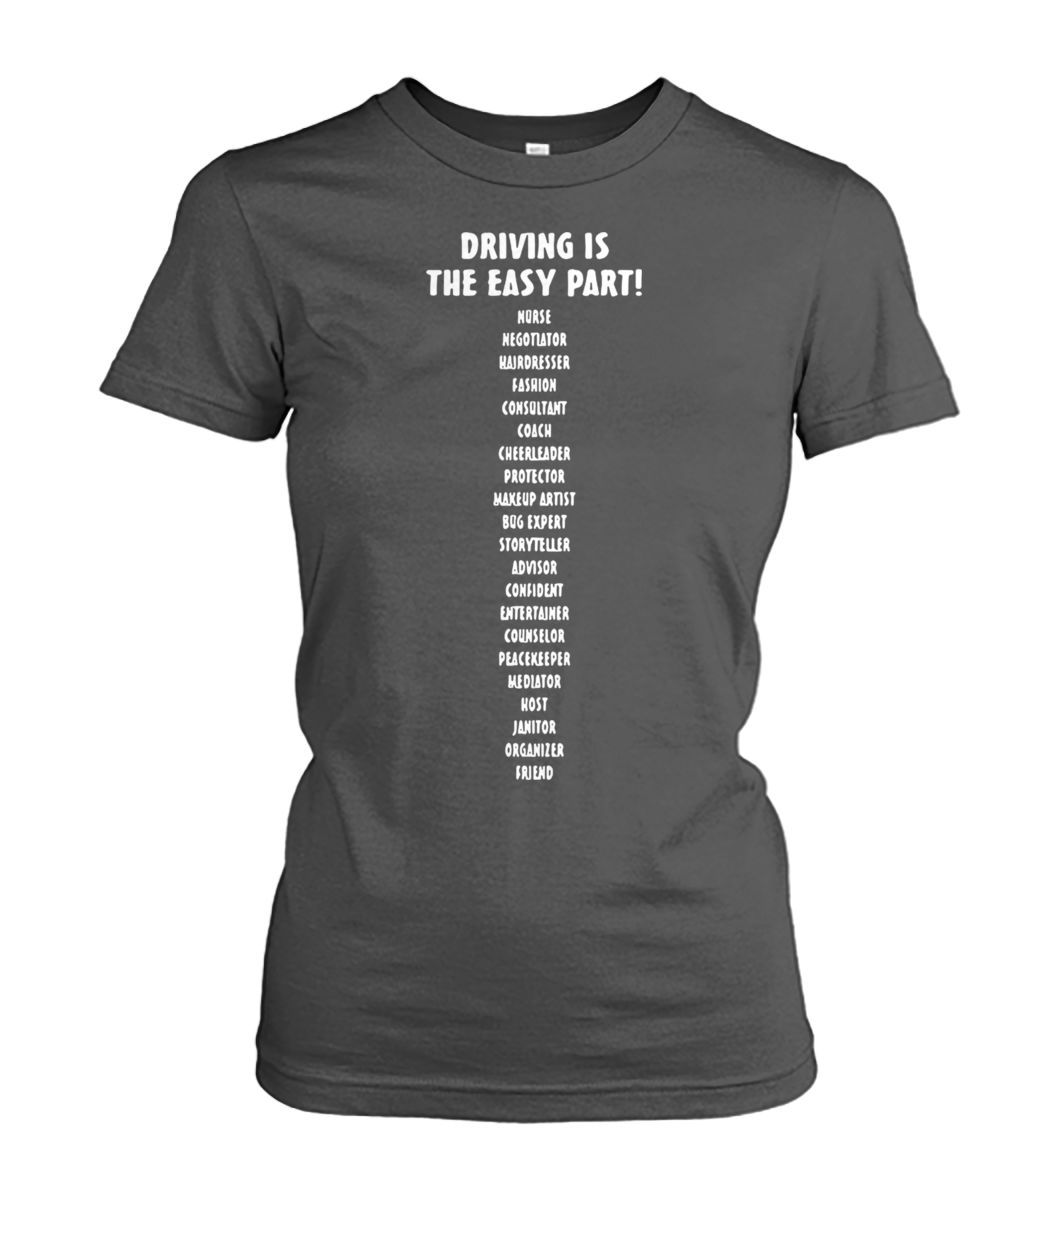 Driving is the easy part nurse negotiator hairdresser fashion women's crew tee